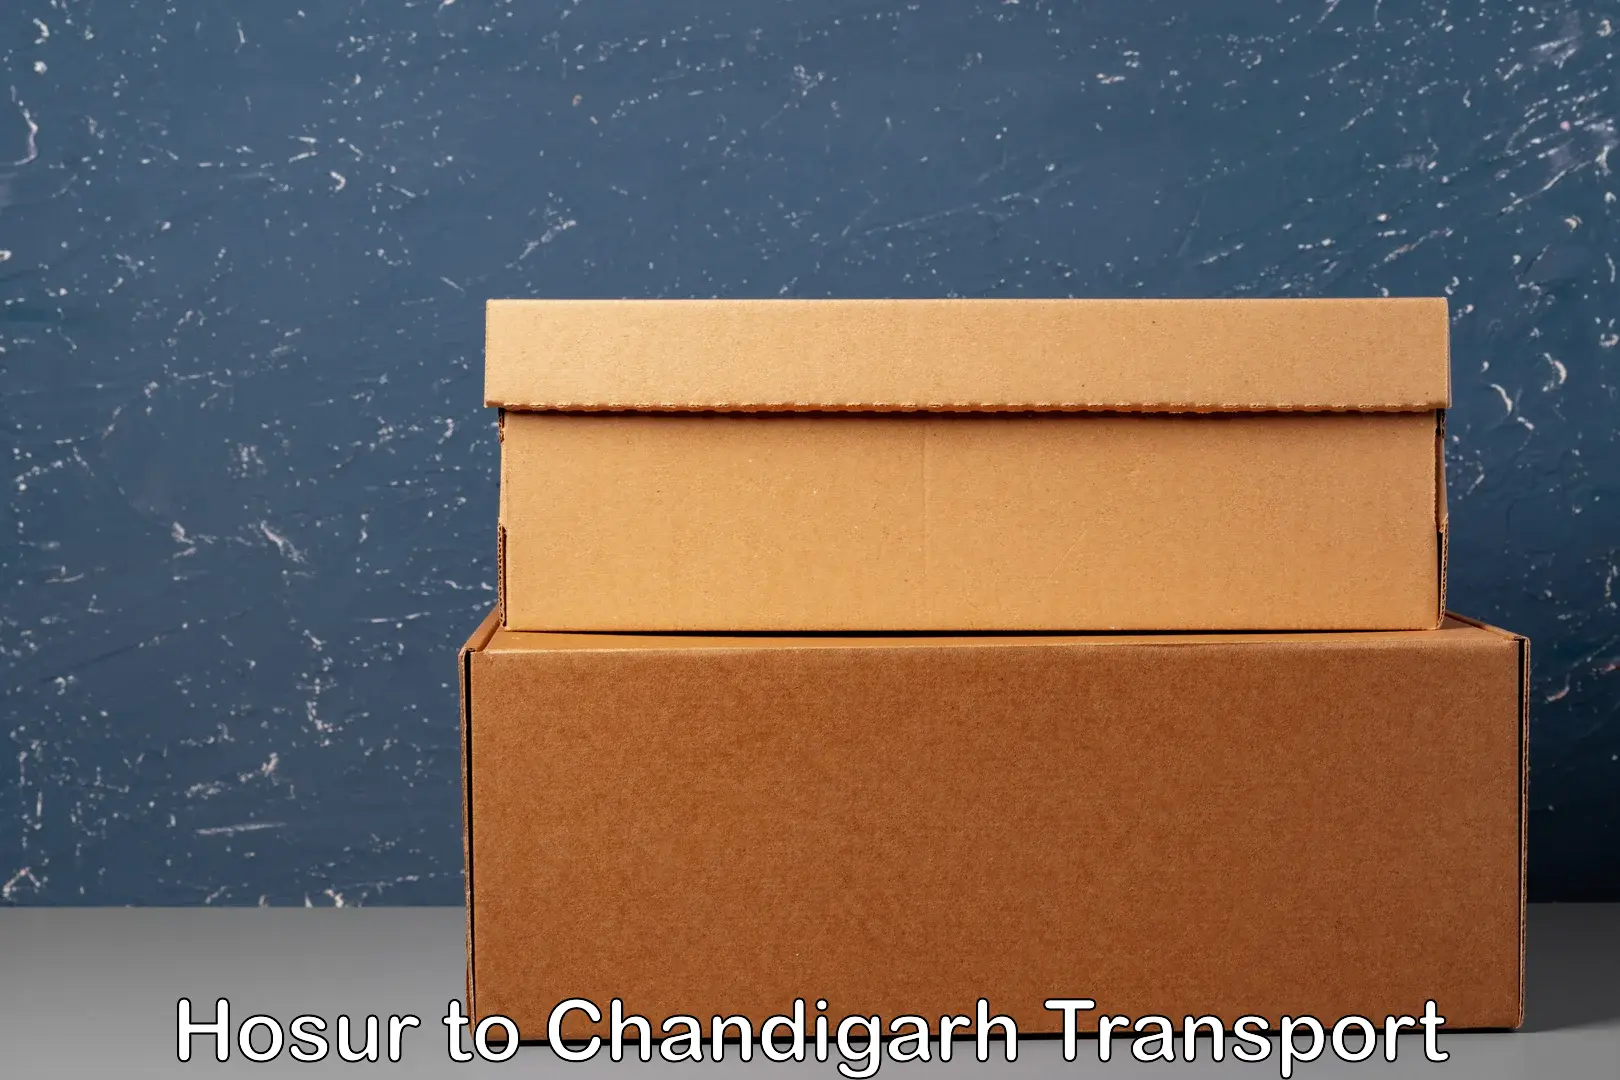 Daily transport service Hosur to Chandigarh